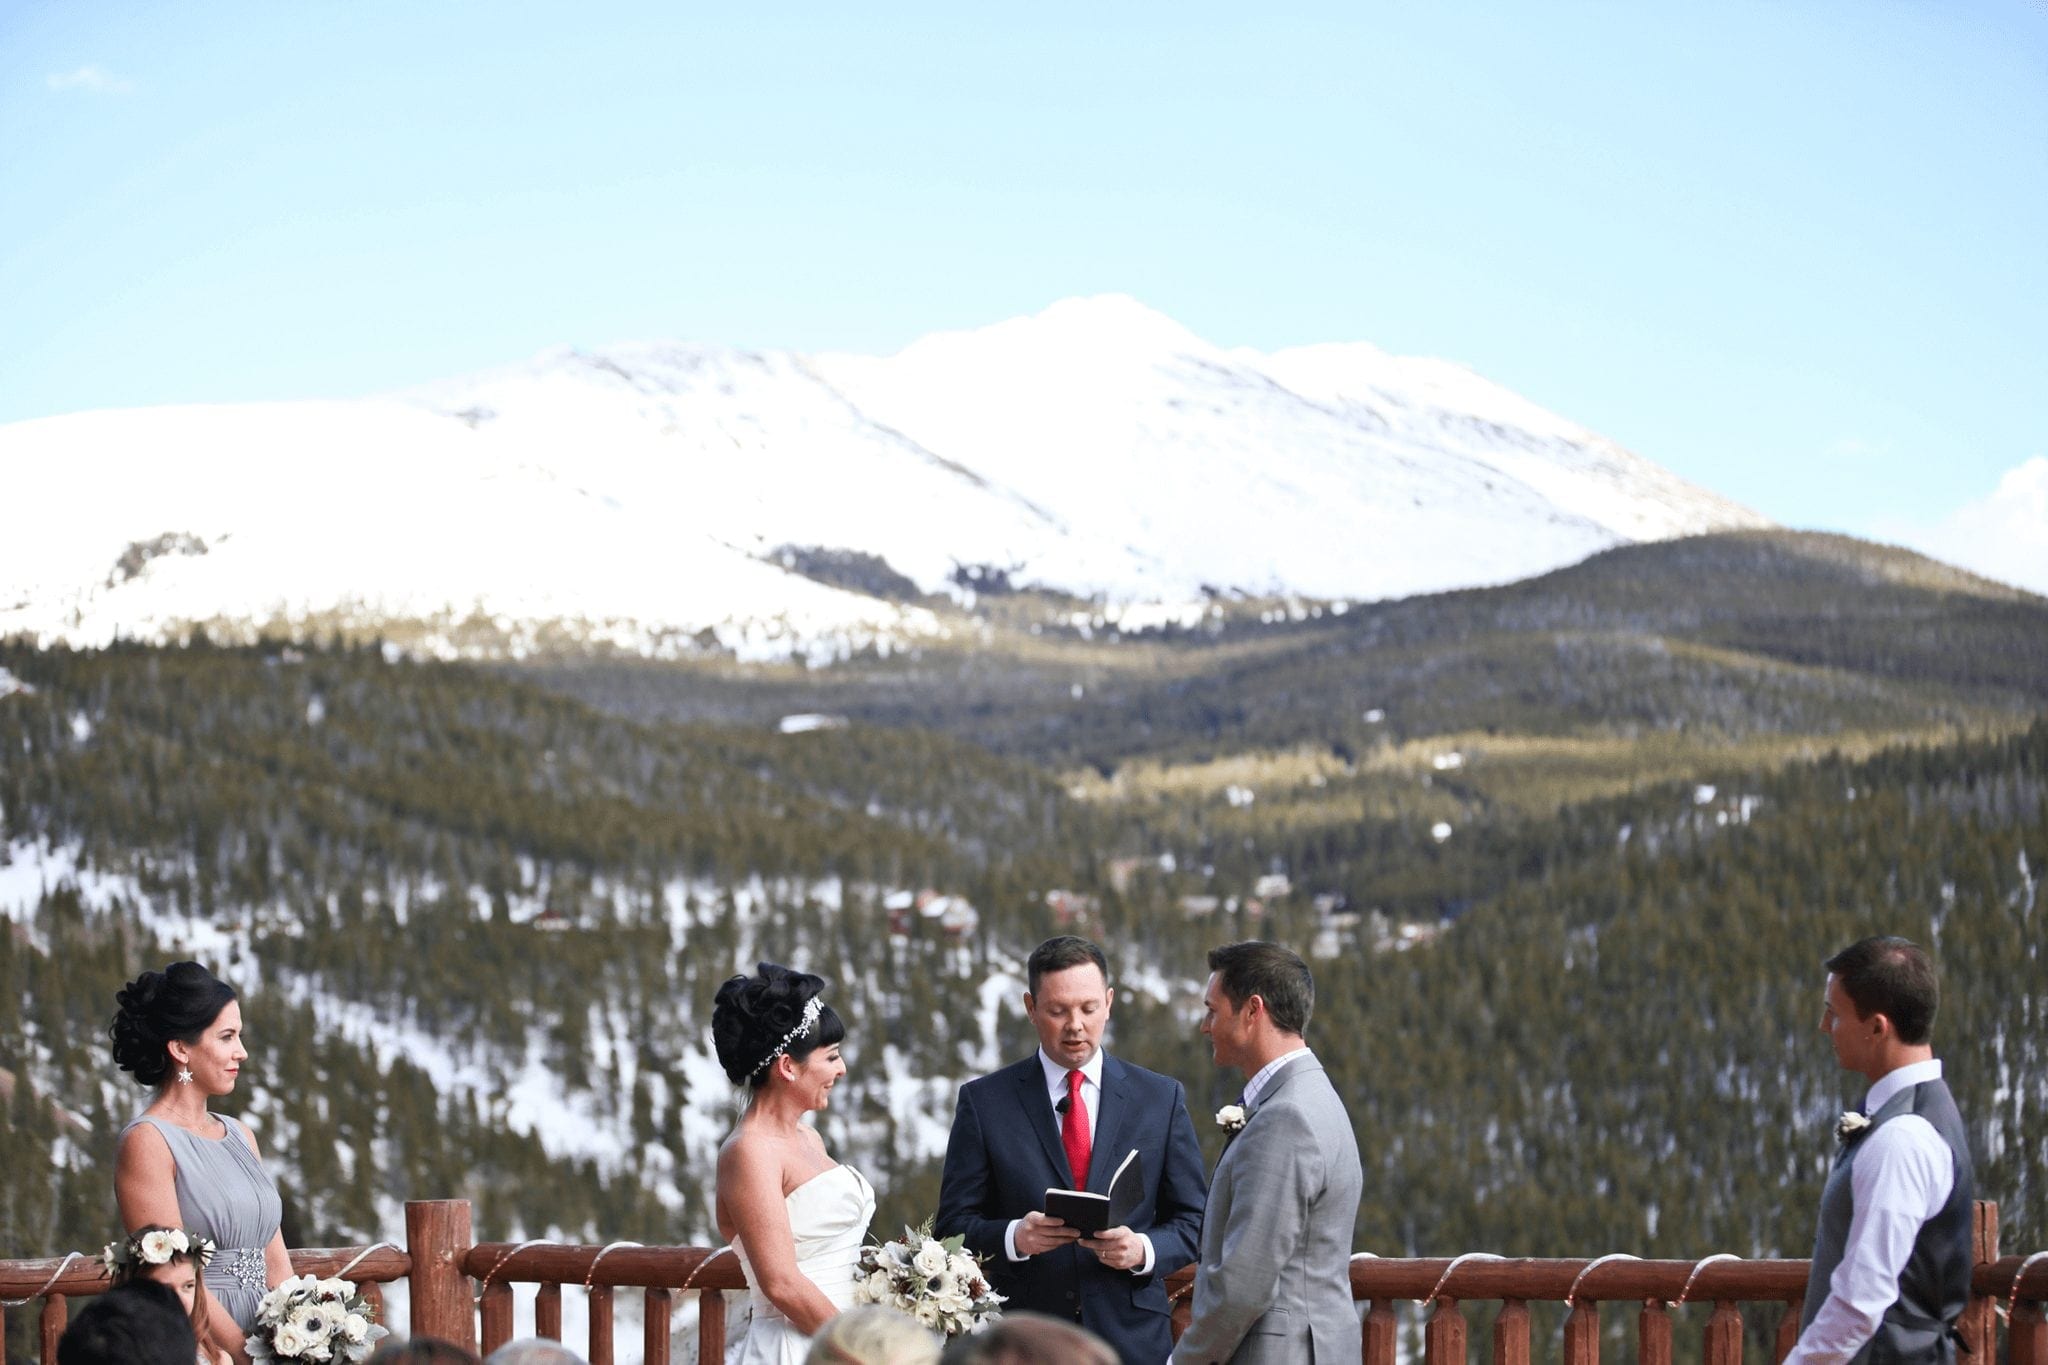 A Bride and Groom at a Winter Wedding Ceremony in Breckenridge Mountains